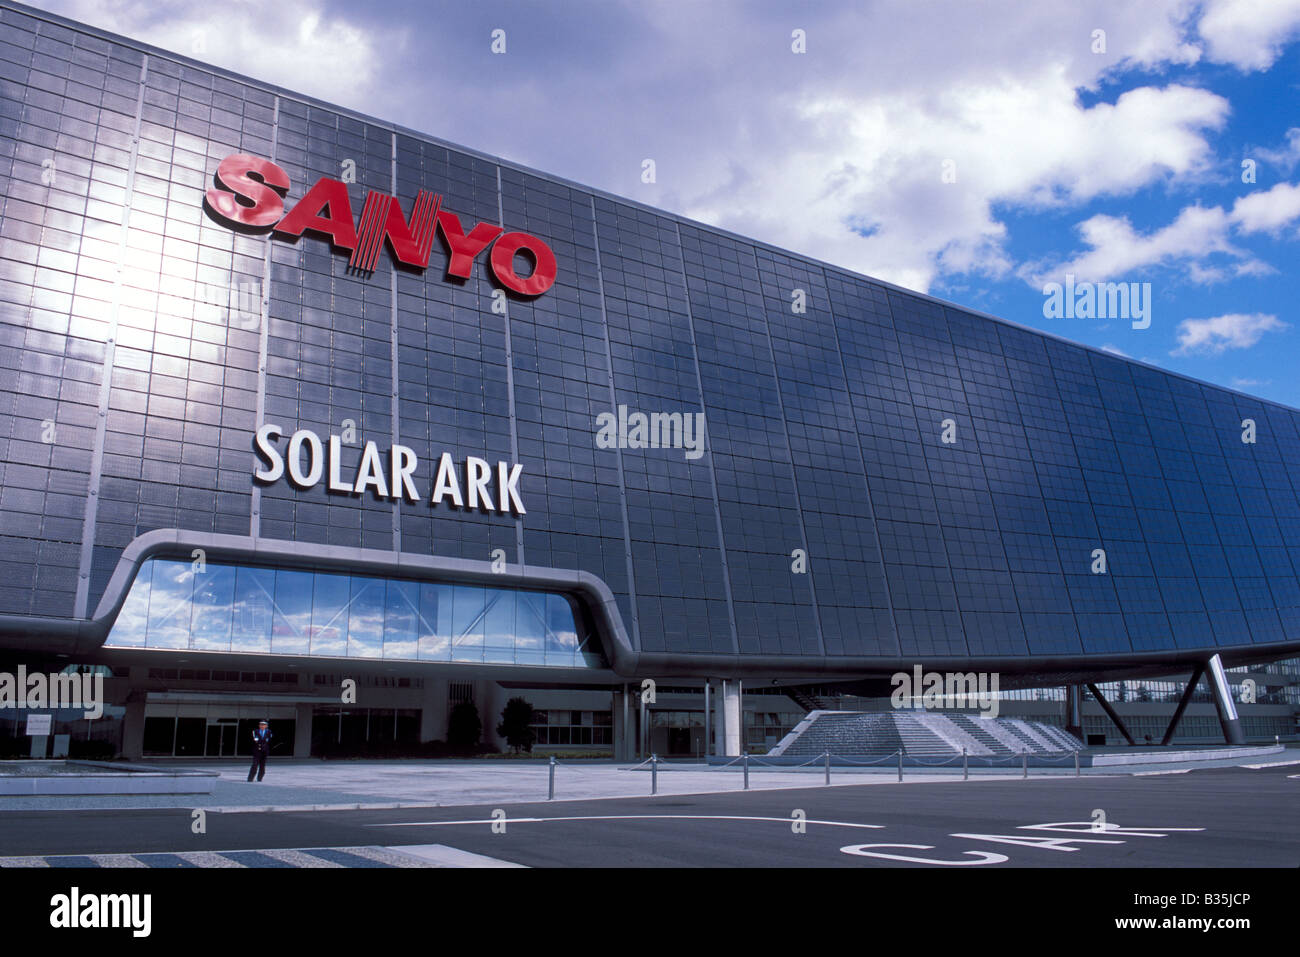 Sanyo Solar Ark unique shape building covered with photovoltaic solar panels for generating electrical power from the sun Stock Photo